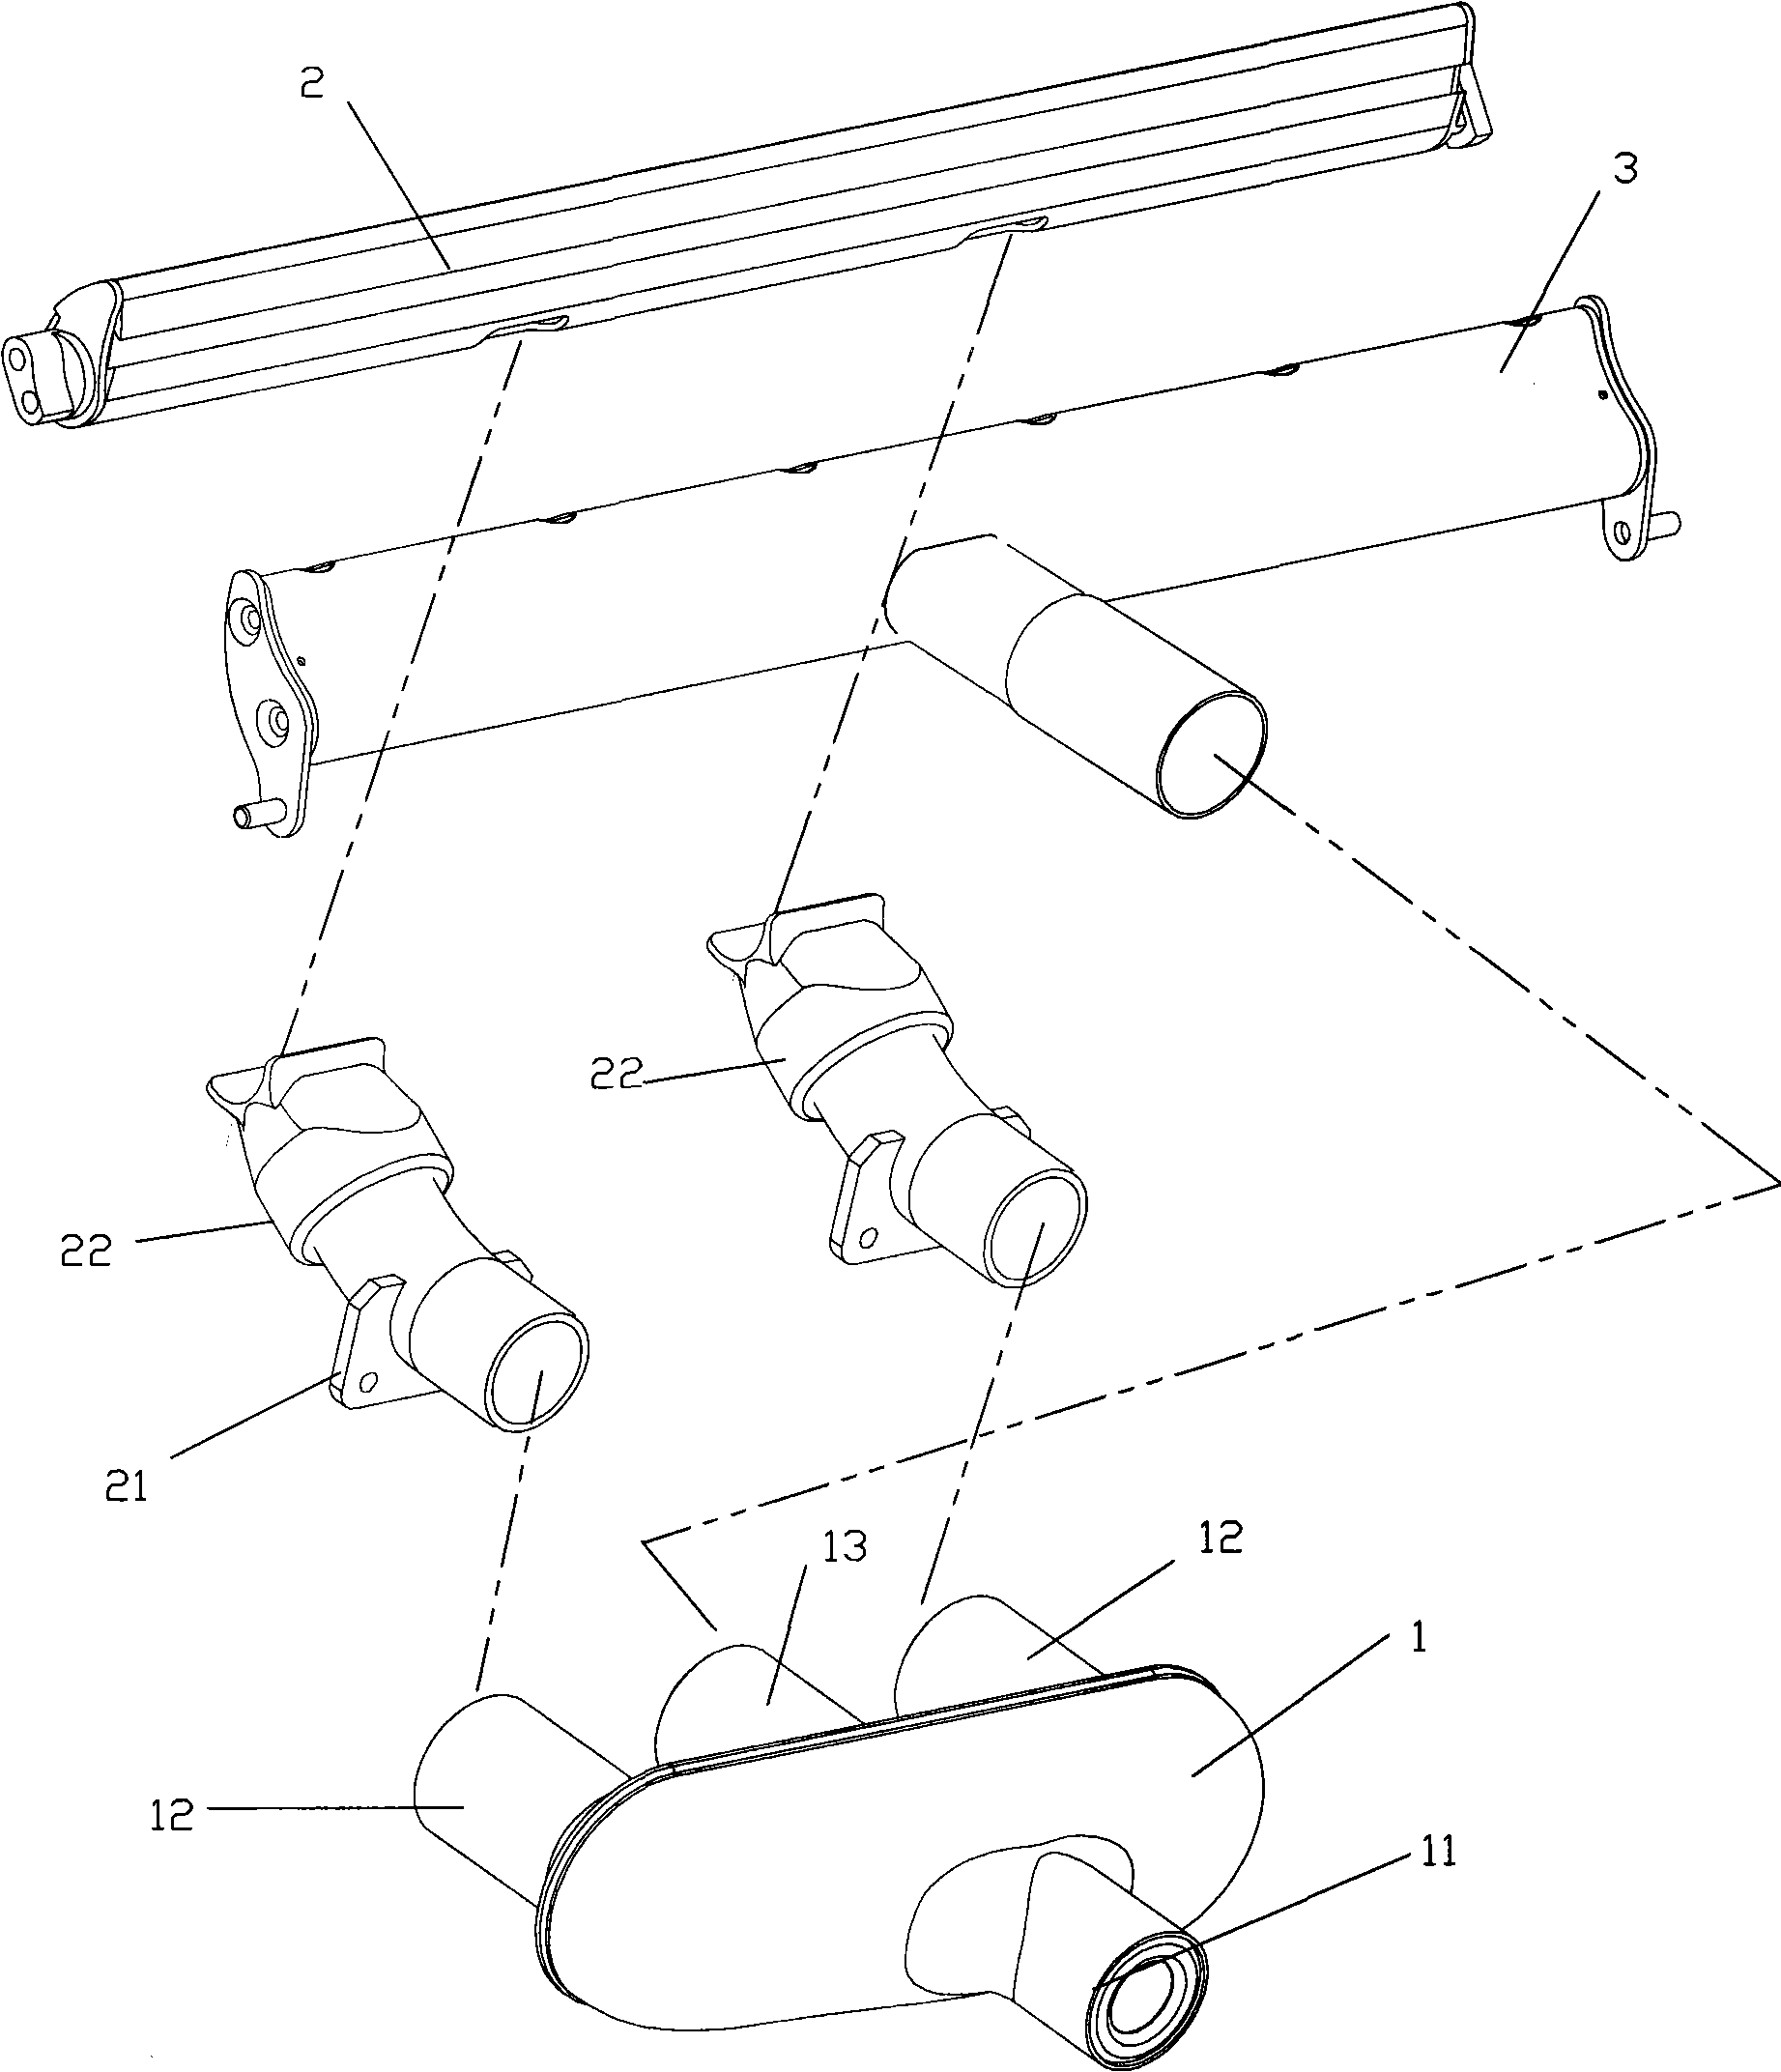 Air drafting device for compact spinning